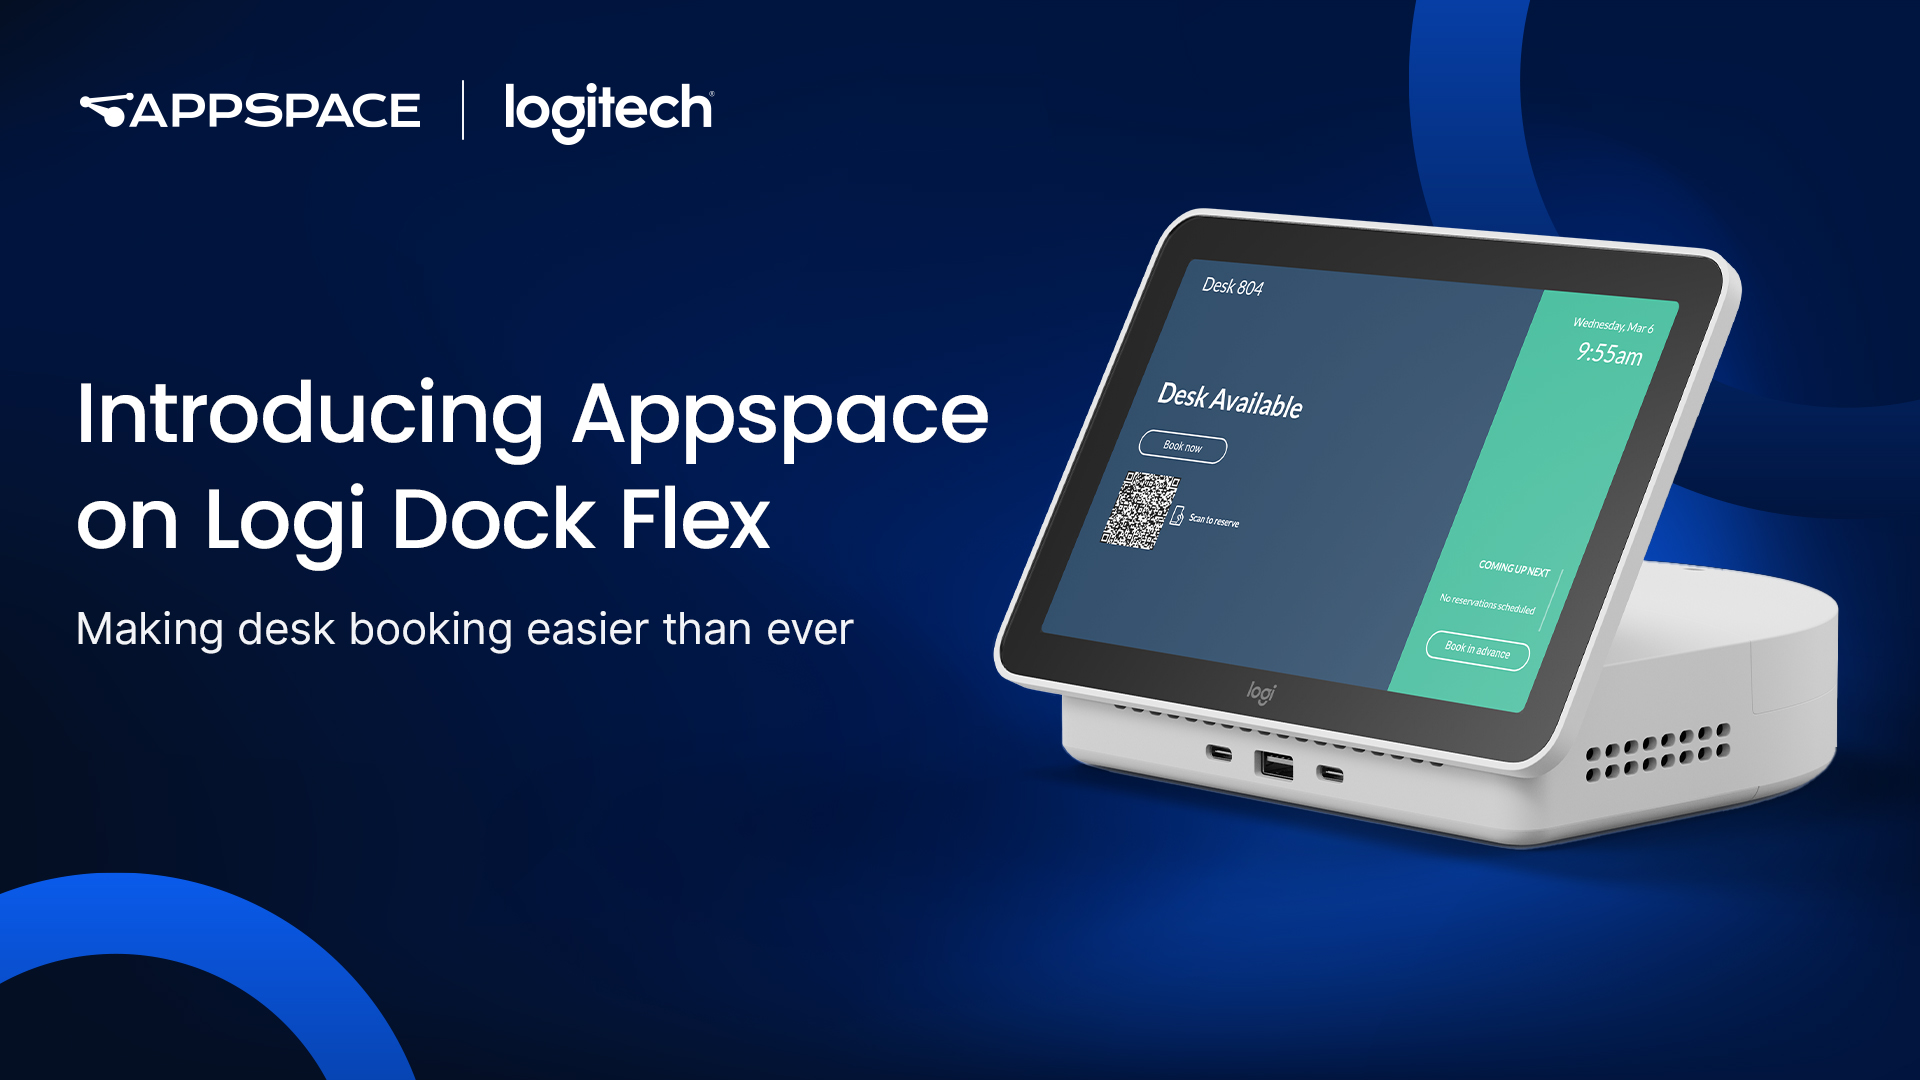 Desk booking just got easier: Appspace is now available on Logi Dock Flex